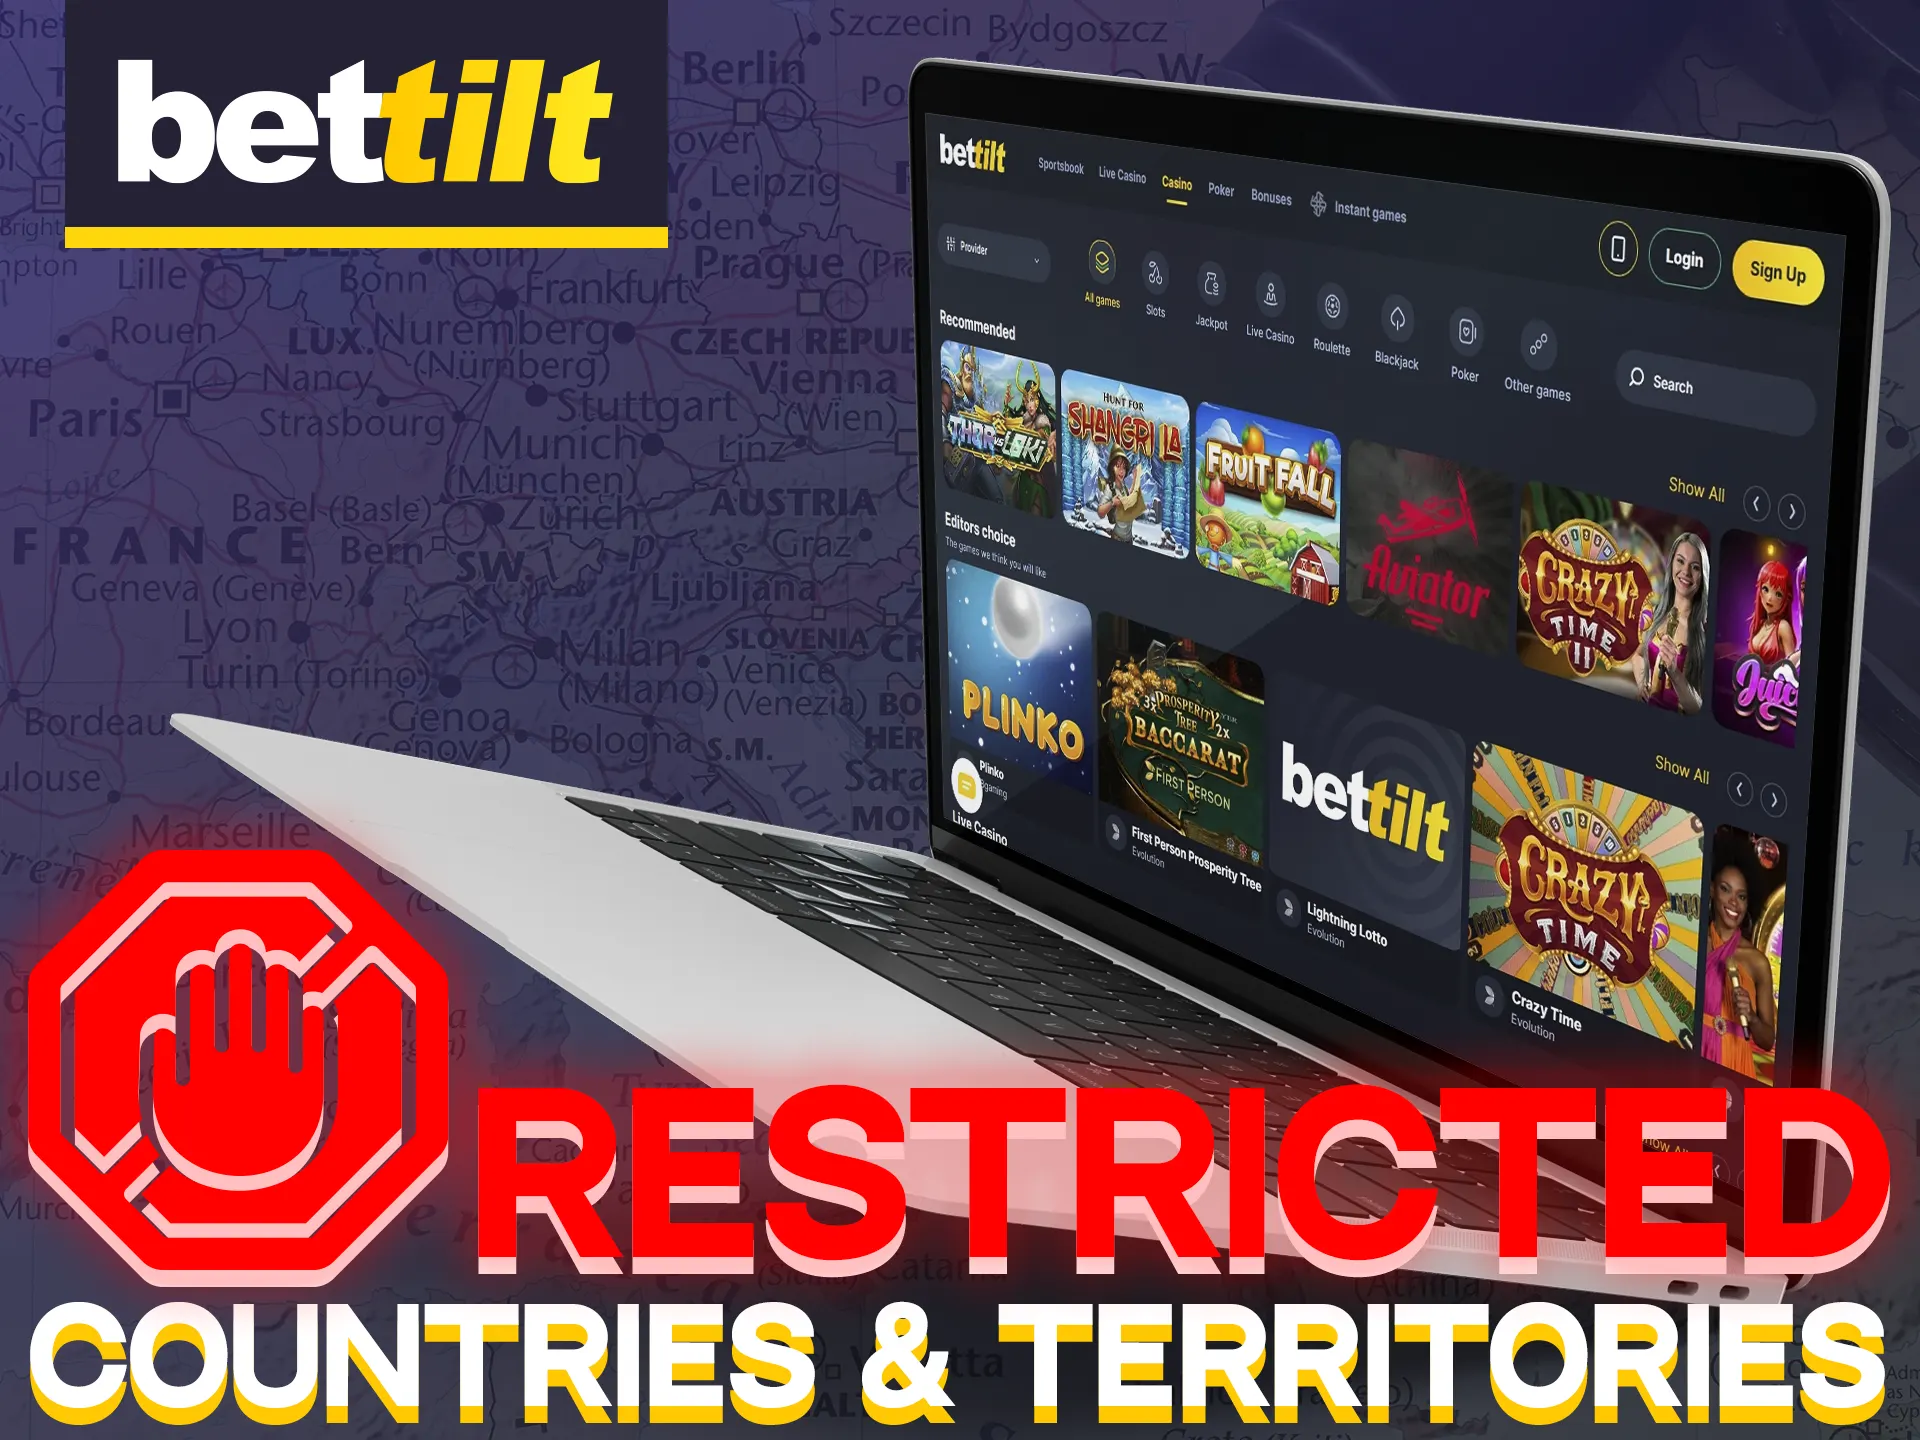 At Bettilt restrictions applying to certain countries and territories.